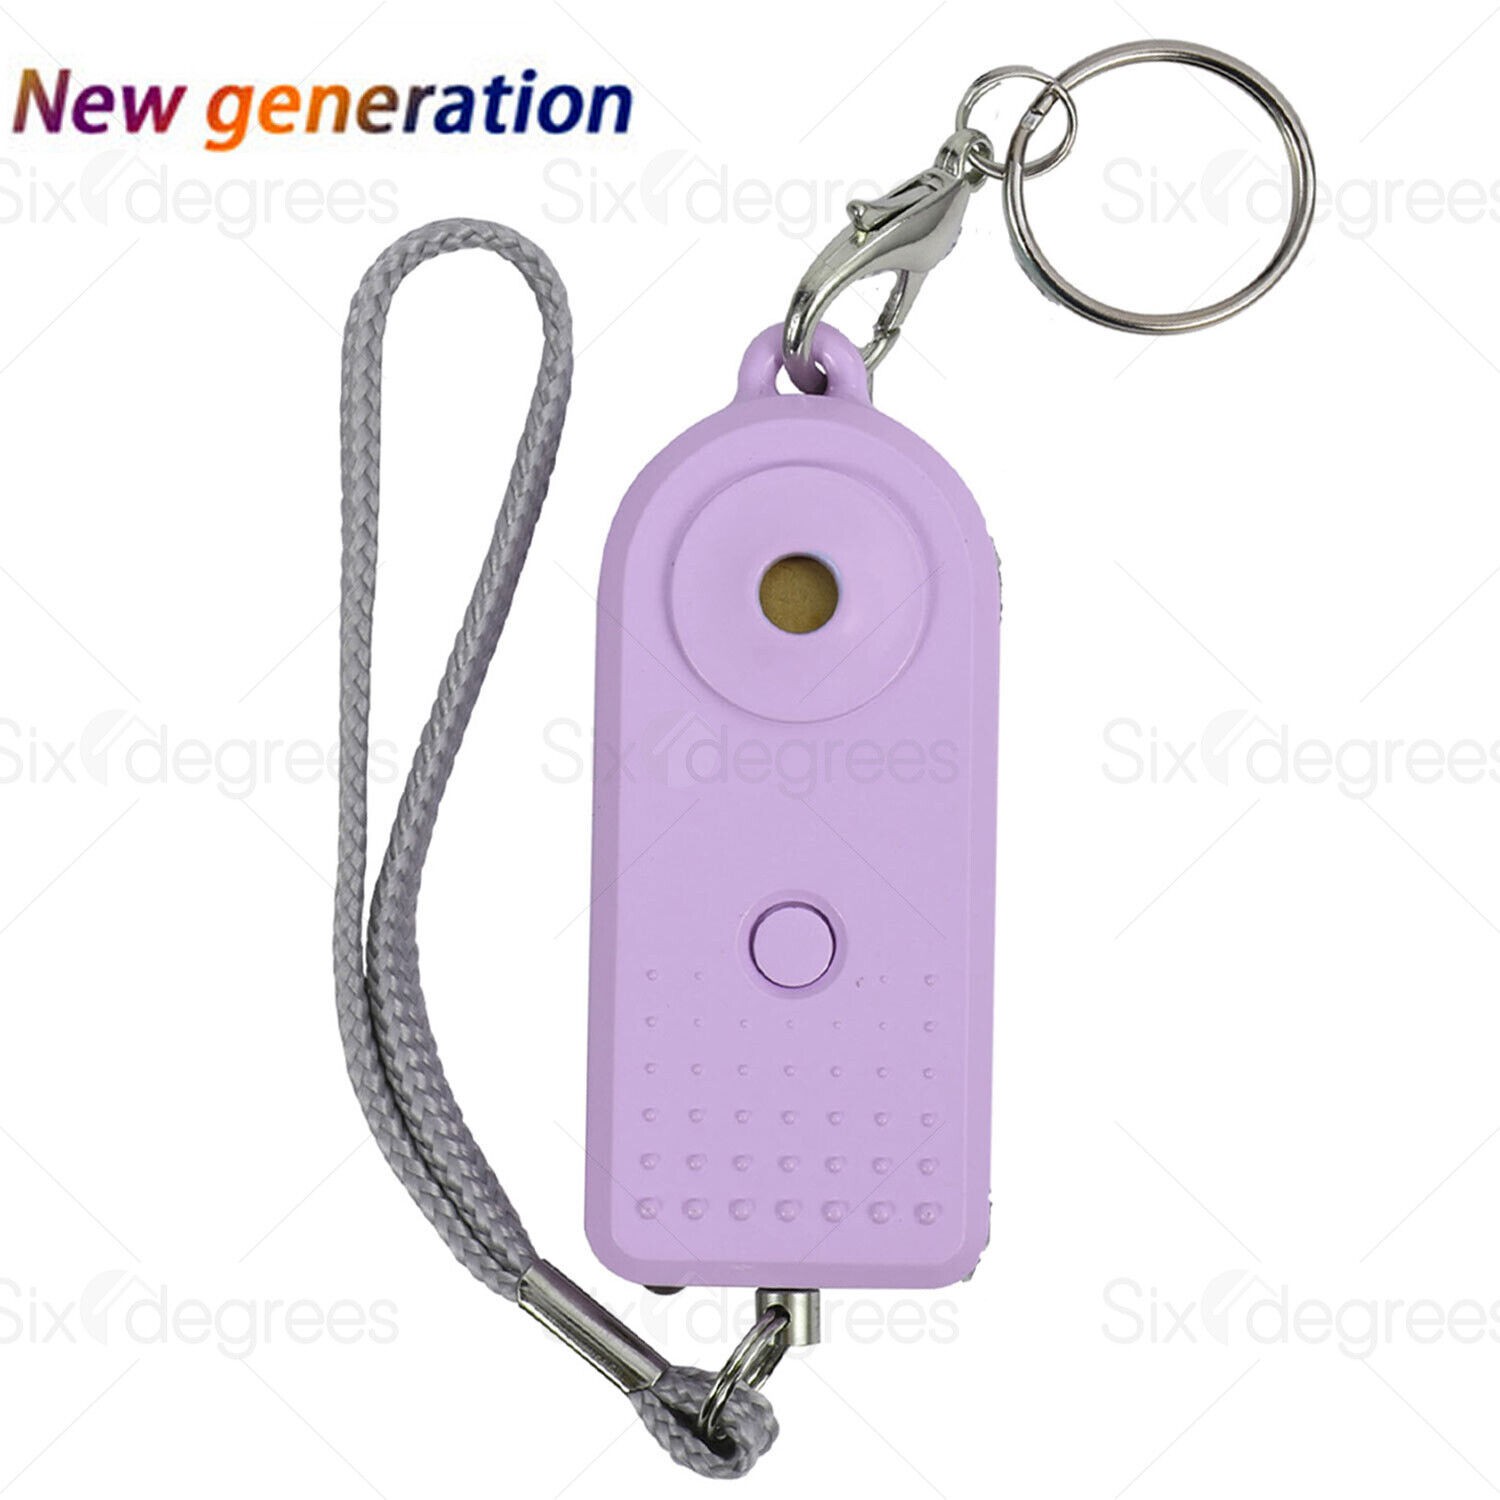 140DB Personal Alarm Keychain with LED Light